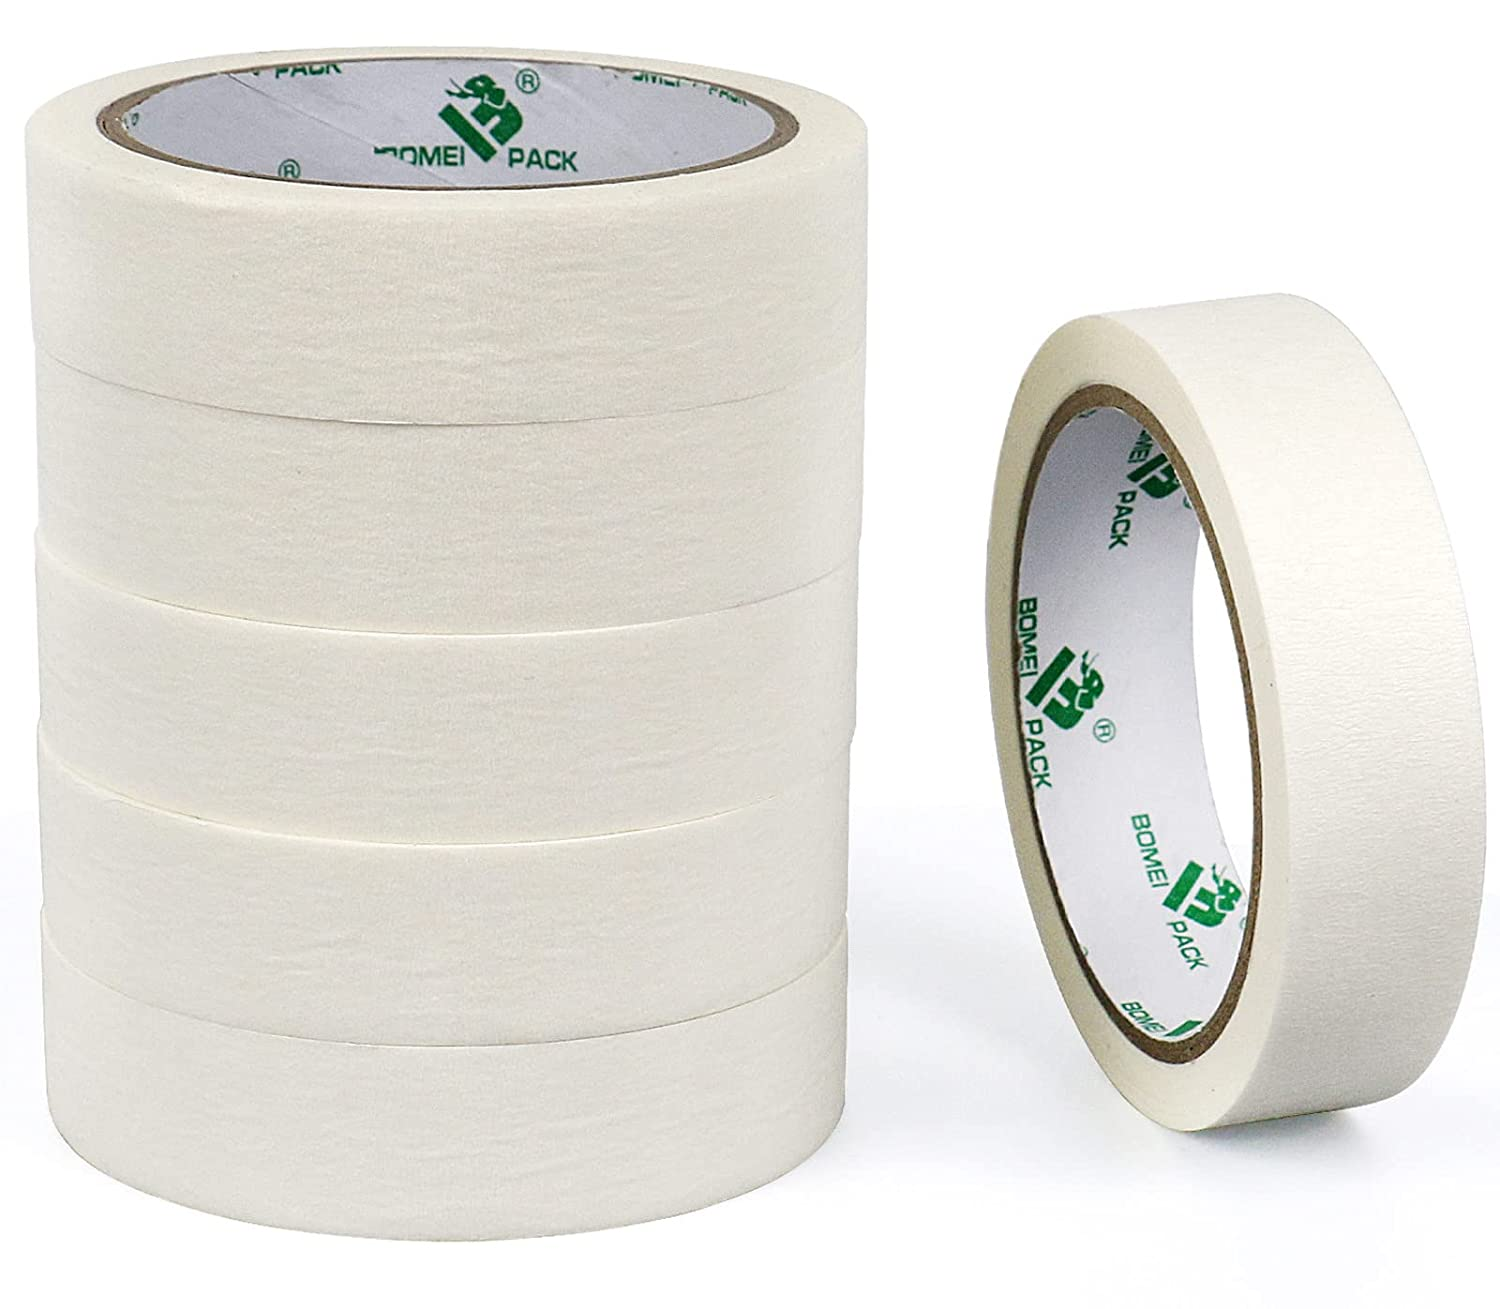 BOMEI PACK White Masking Tape Decorative Writable White Painters Tape for  Arts & Crafts,6 Rolls Pack, 24Mm X 20M per Roll